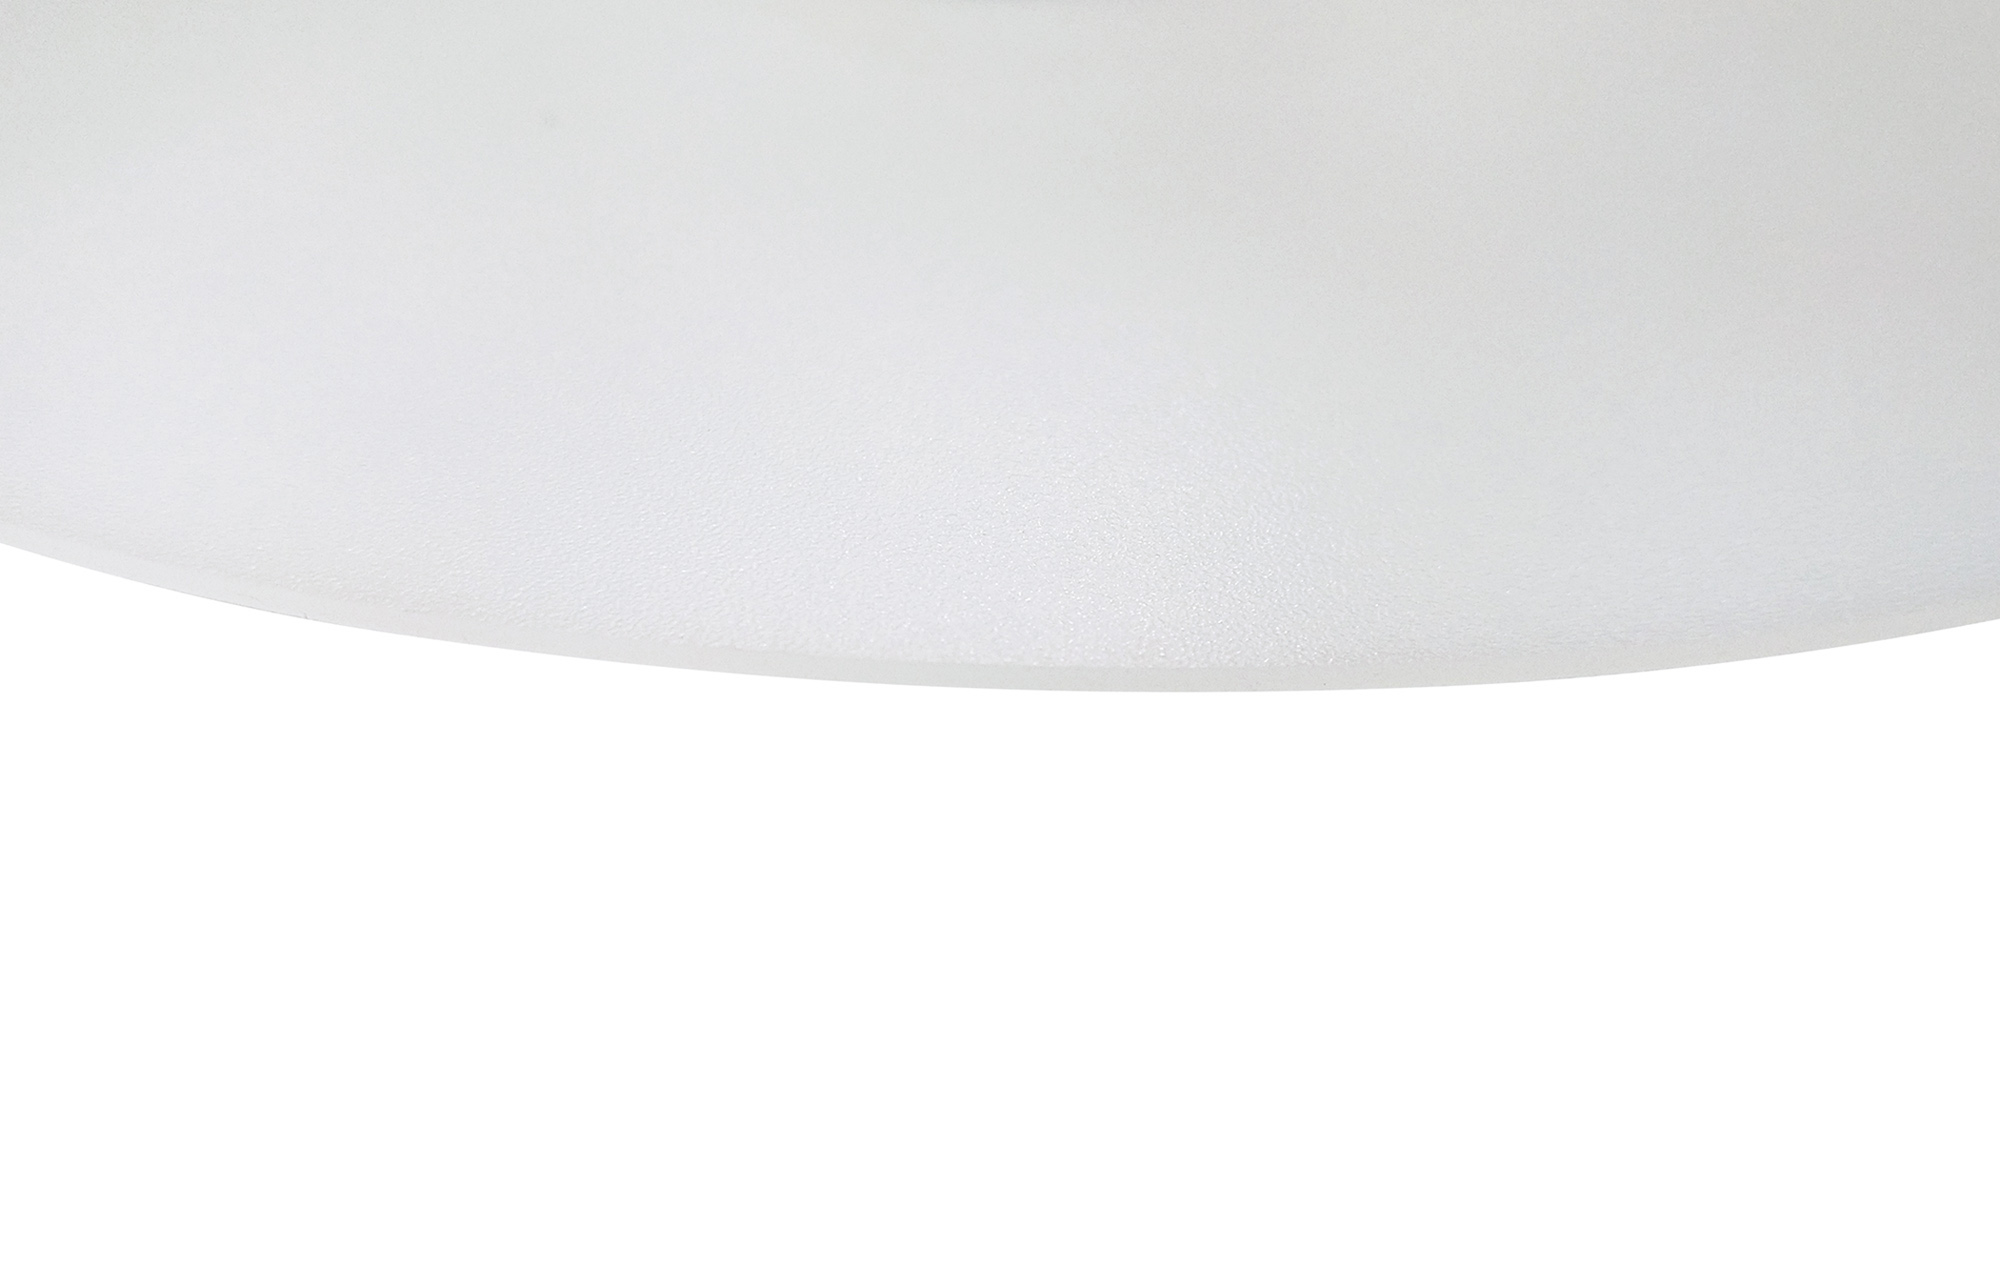 Baymont 60cm 5 Light Pendant Polished Chrome; Ivory Pearl/White; Frosted Diffuser DK0475  Deco Baymont CH IV